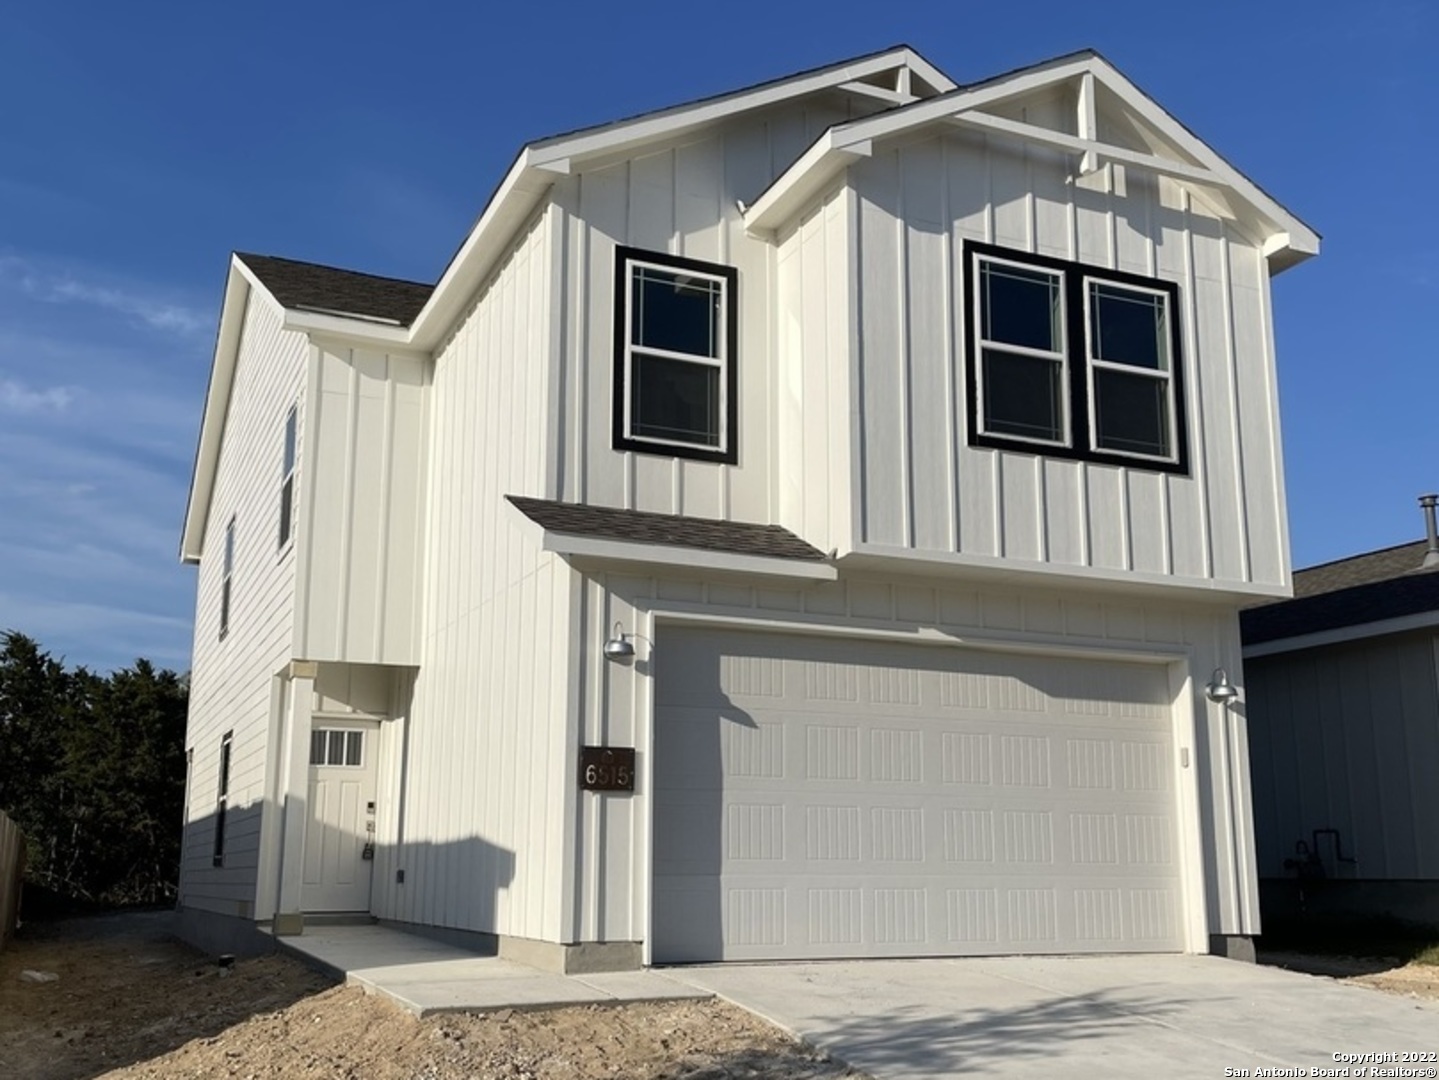 *Up to $15k in closing incentives when utilizing builders preferred lender! Welcome to the Salado Creek plan. Hello privacy, this home backs up to wooded area. A 2,000 square foot wide-open concept floorplan featuring separate kitchen and dining area and covered patio. 42" cabinets, quartz countertops, ceramic tile flooring, and a gourmet kitchen package that includes stainless steel appliances. 9-foot ceilings throughout with all bedrooms upstairs. Primary bedroom offers a vaulted ceiling. Upstairs features a secondary living space ideal for spreading out. Great location close to the medical district, and close access to major highways. Some photos are representative of floor plan and not of actual home. Home will be complete by December 2022.